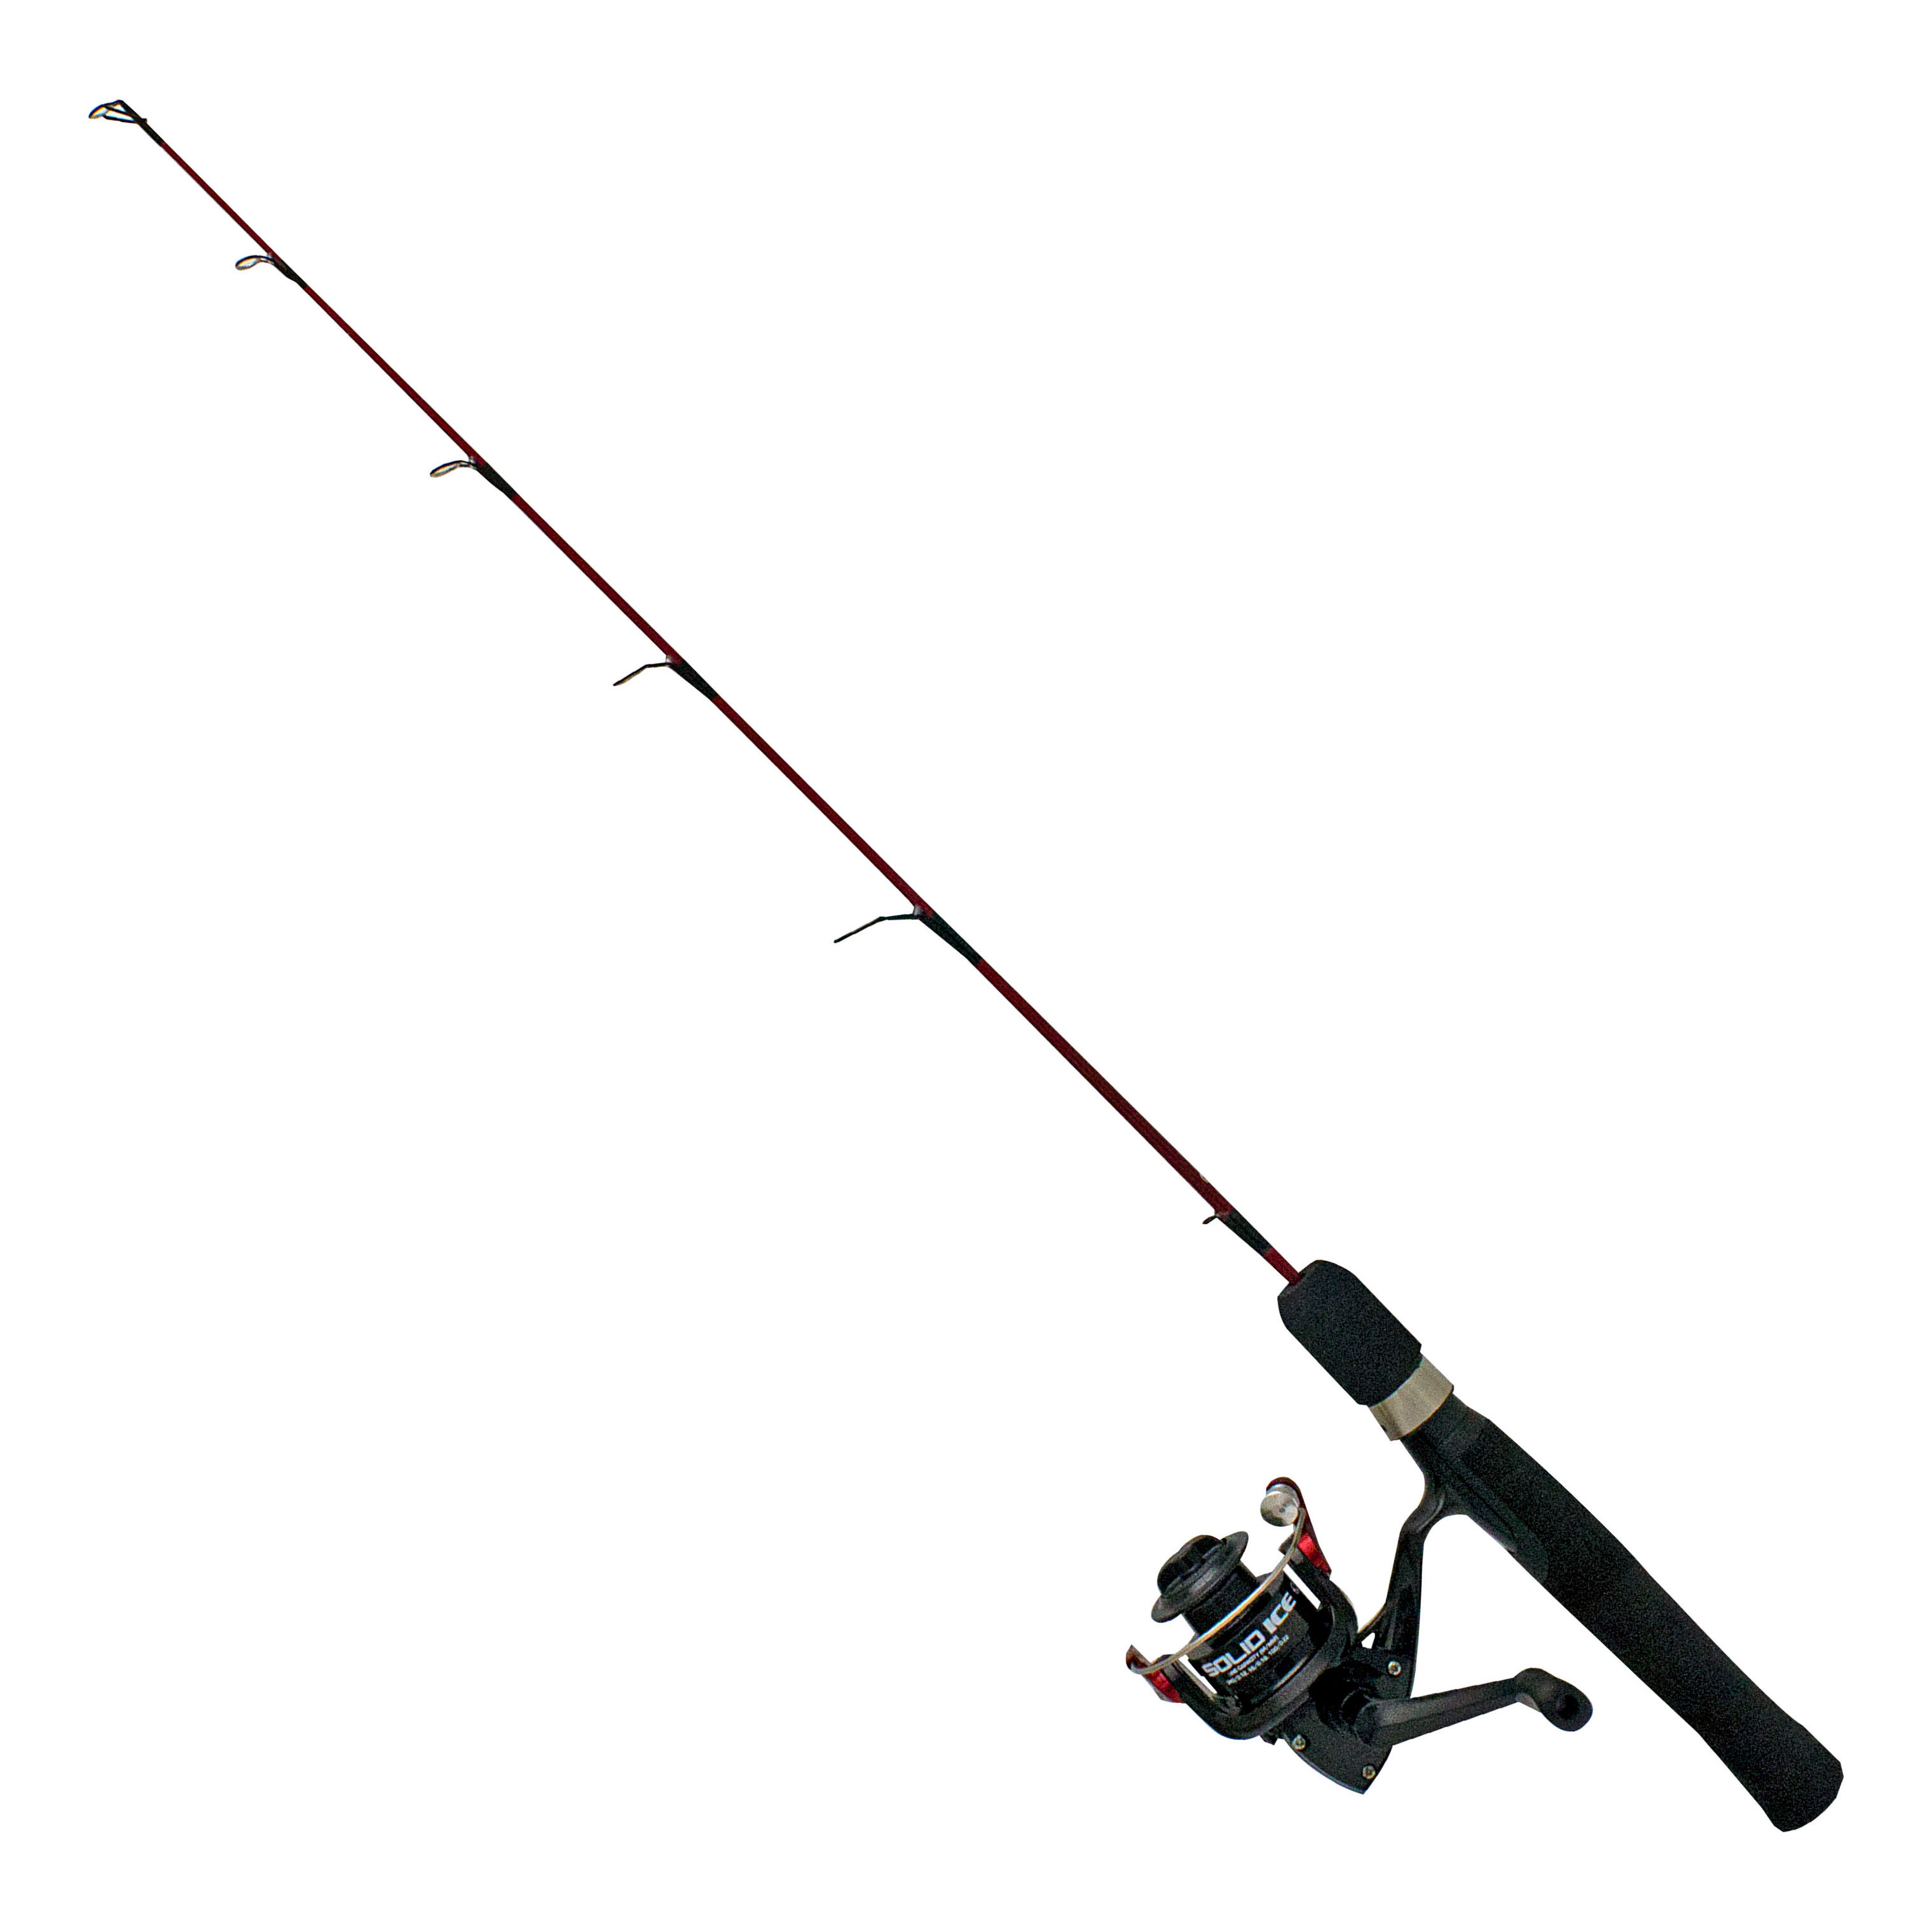 Best Ice Fishing Rod & Reel Combos: Ice Rod & Reel Combos for Canada